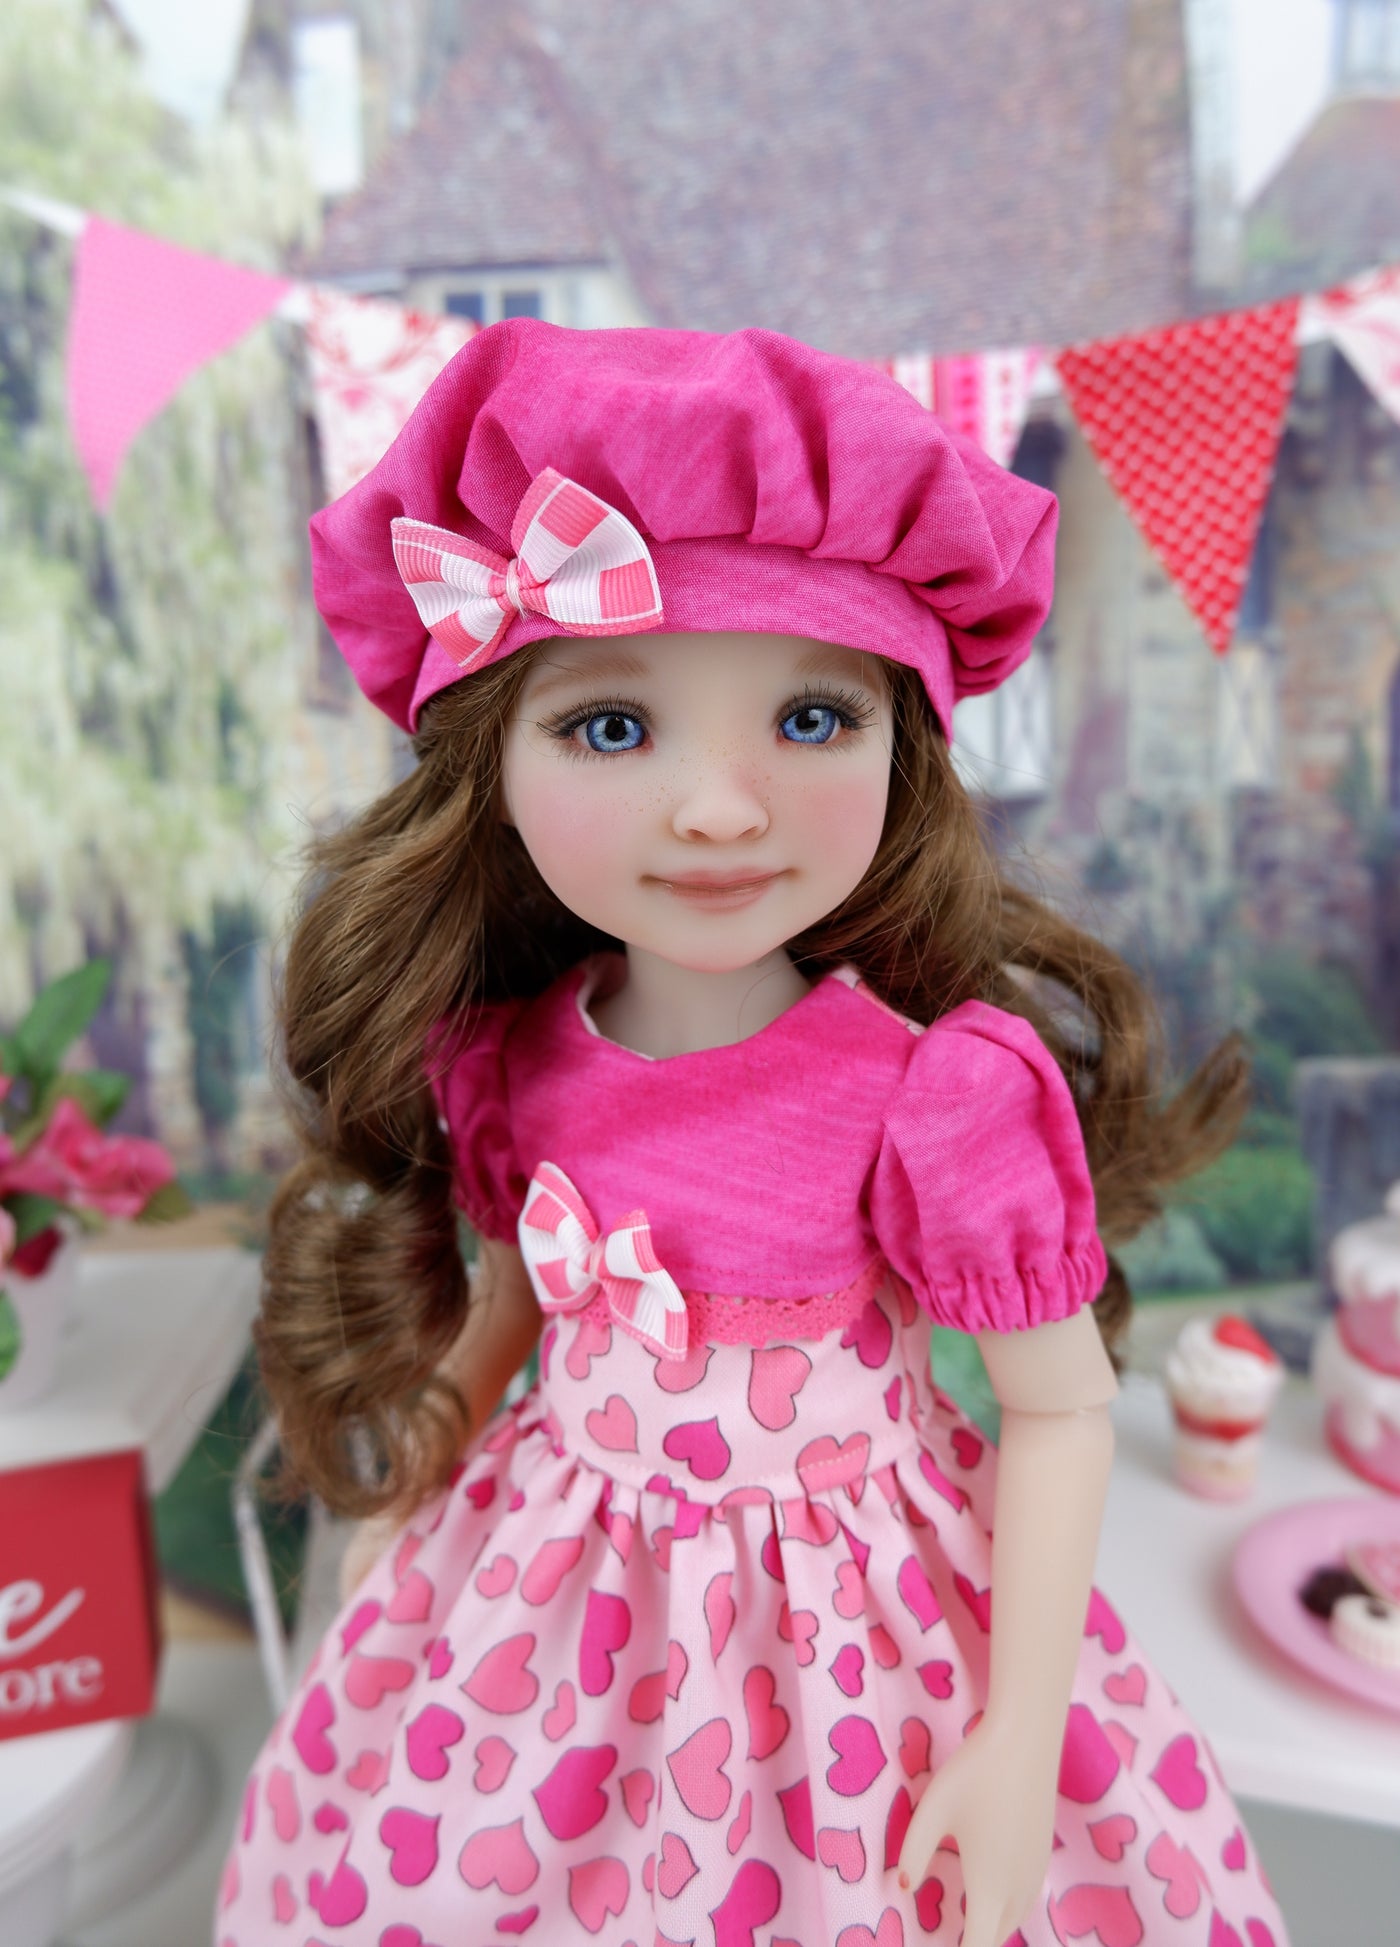 Be Still My Heart - dress with shoes for Ruby Red Fashion Friends doll